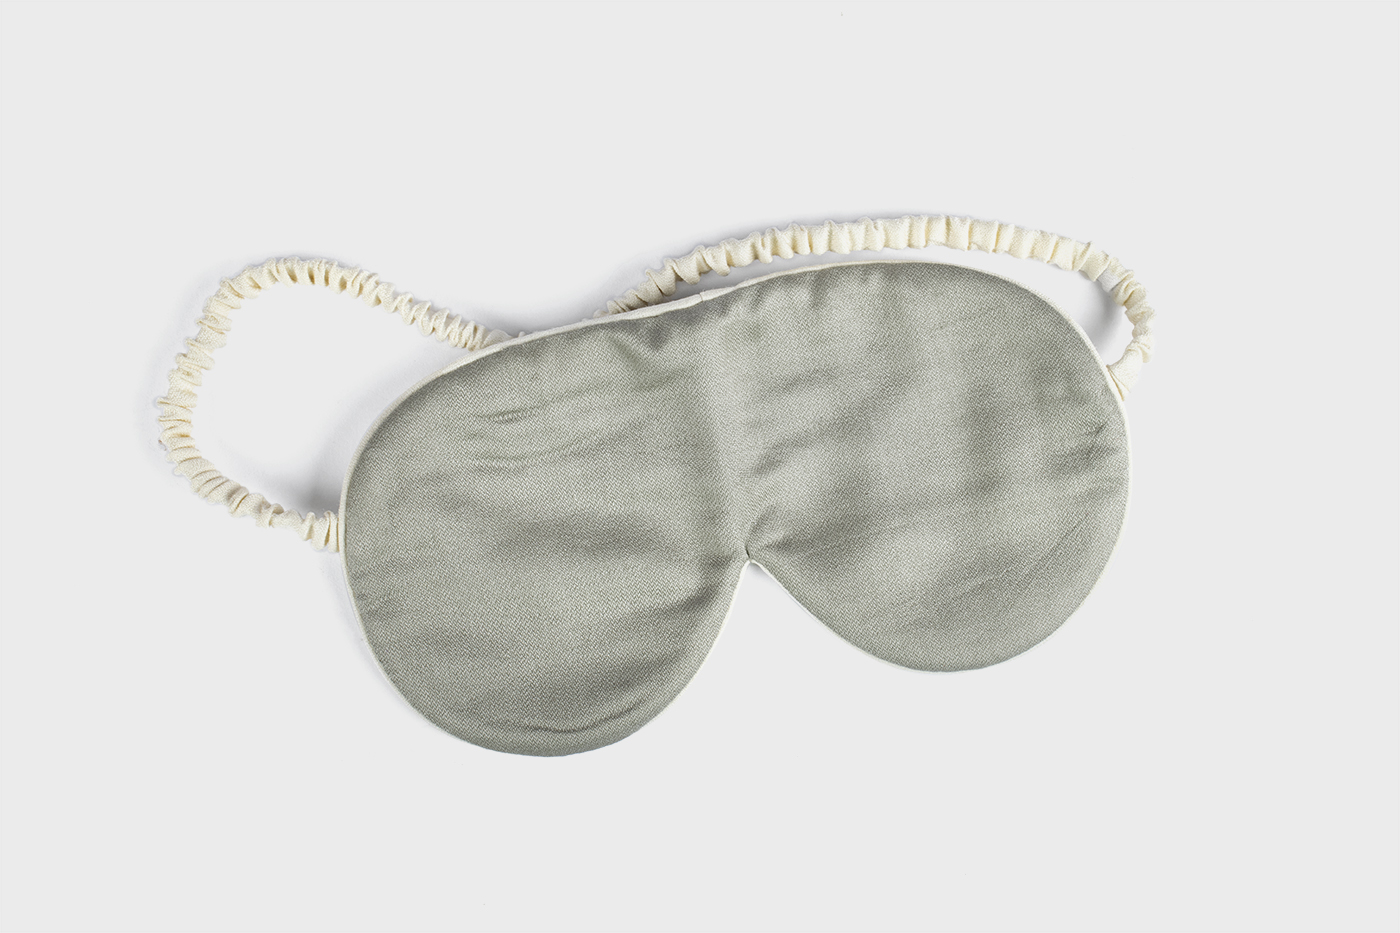 Silk eye mask from The Ethical Silk Company. A Packed with Purpose Impact Partners.